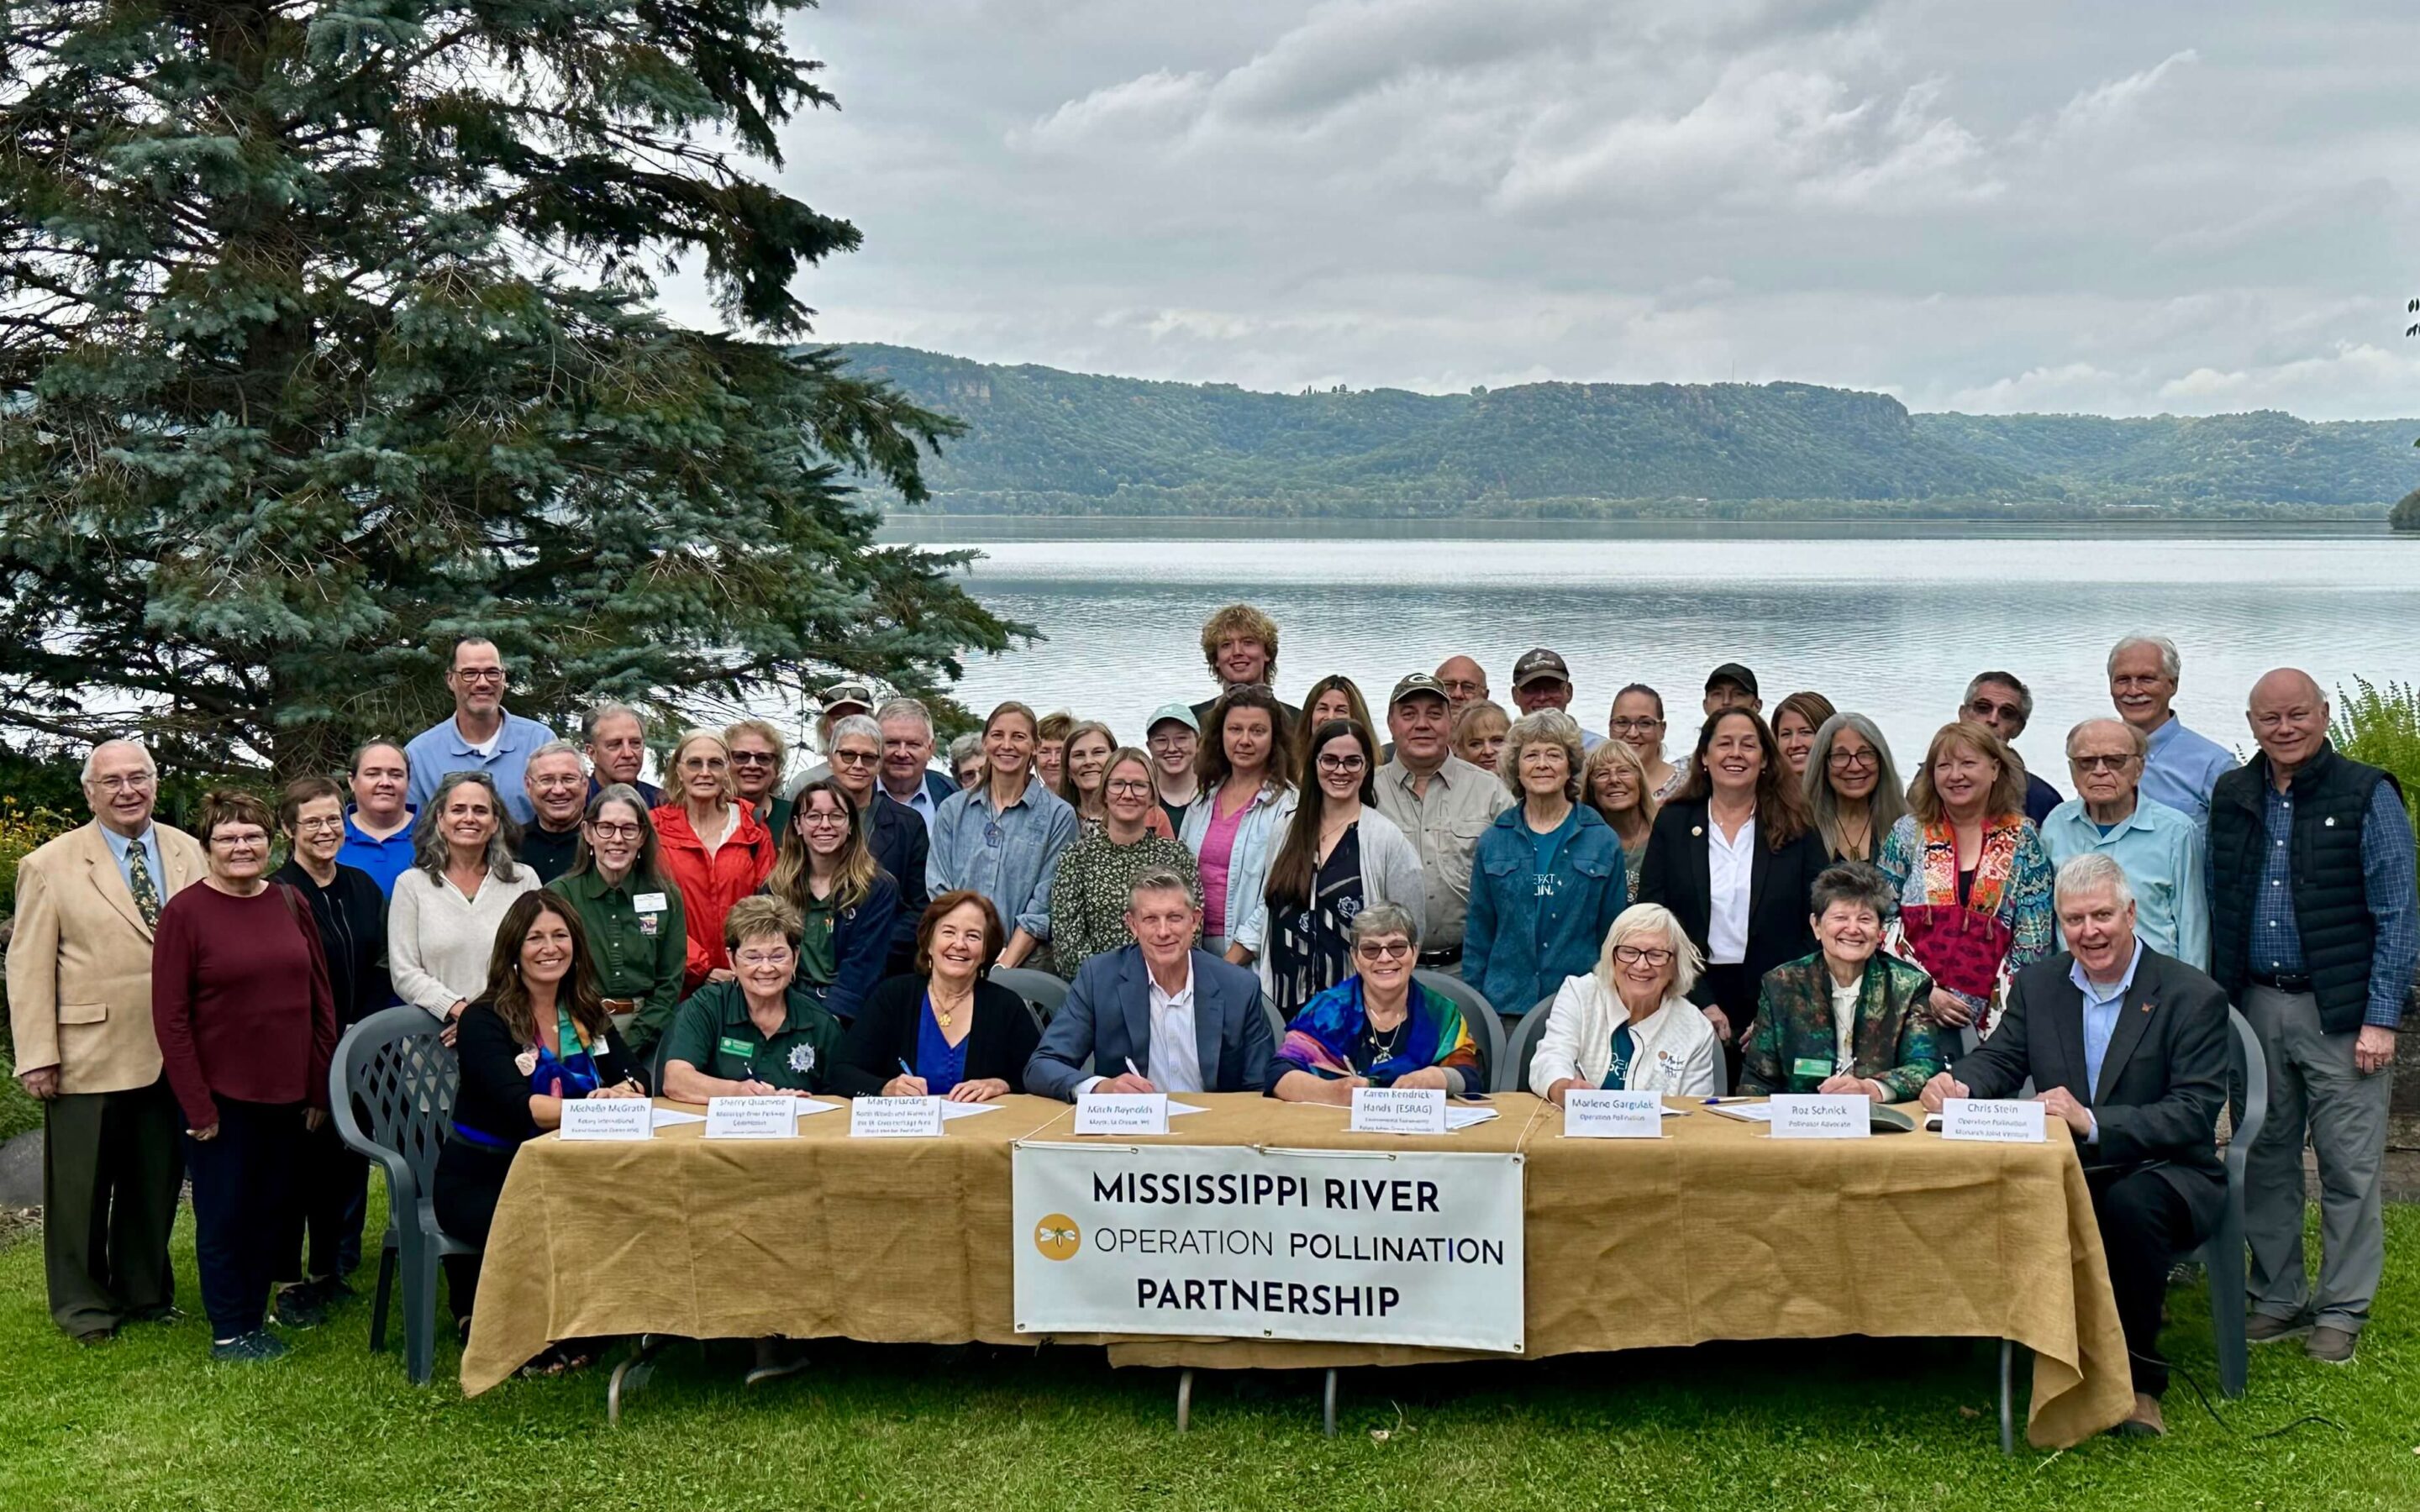 Group of people, representing the Mississippi River Operation Pollination Partnership, in front of river.